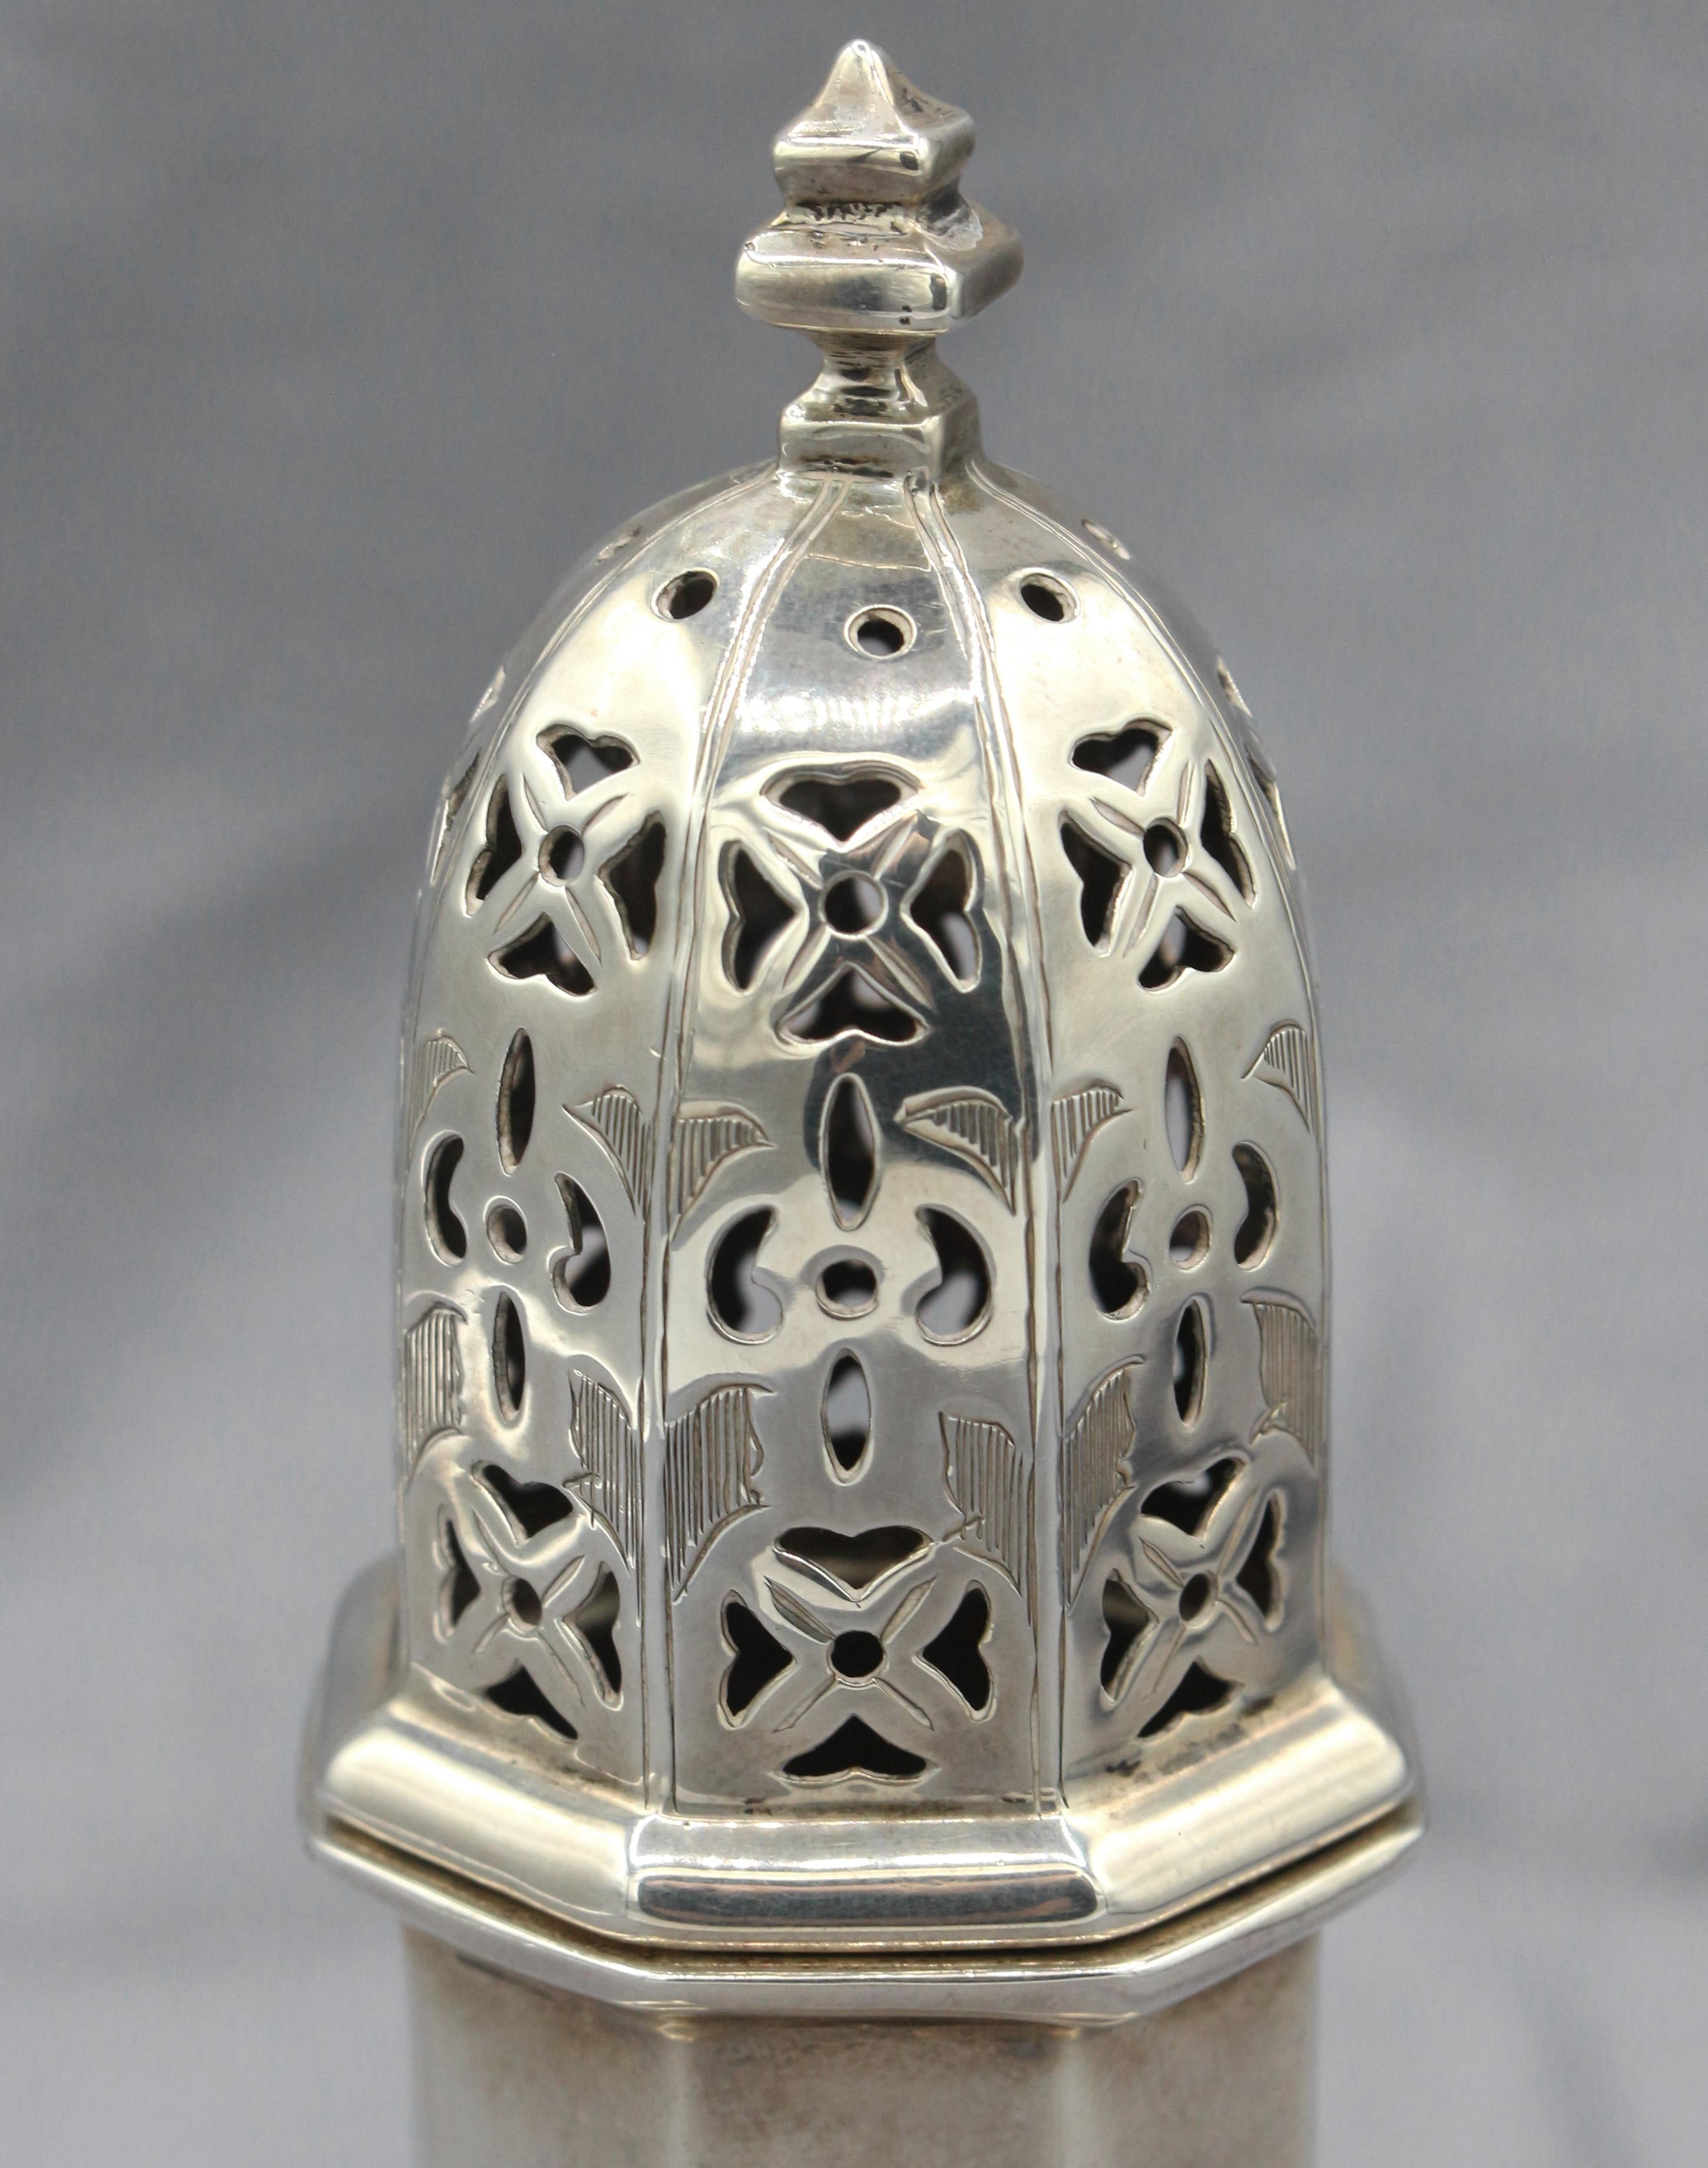 English sterling silver sugar caster by Goldsmiths & Silversmiths of London in 1917. Known for fine Georgian reproductions, this is a superb example with octagonal body, stepped base & pierced & bright cut cover. 4.20 troy oz. 
6.25